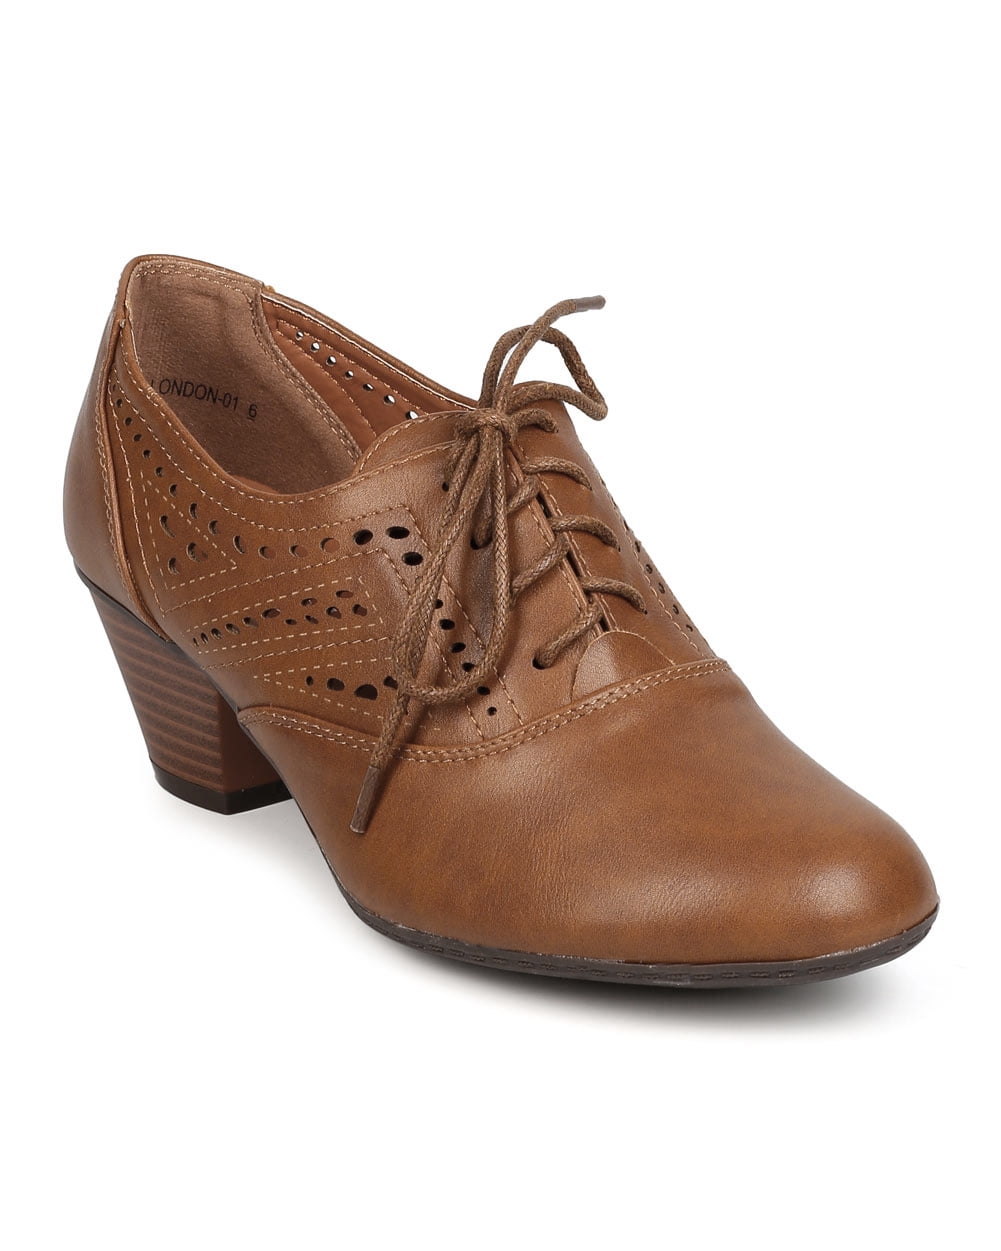 lace up perforated oxfords